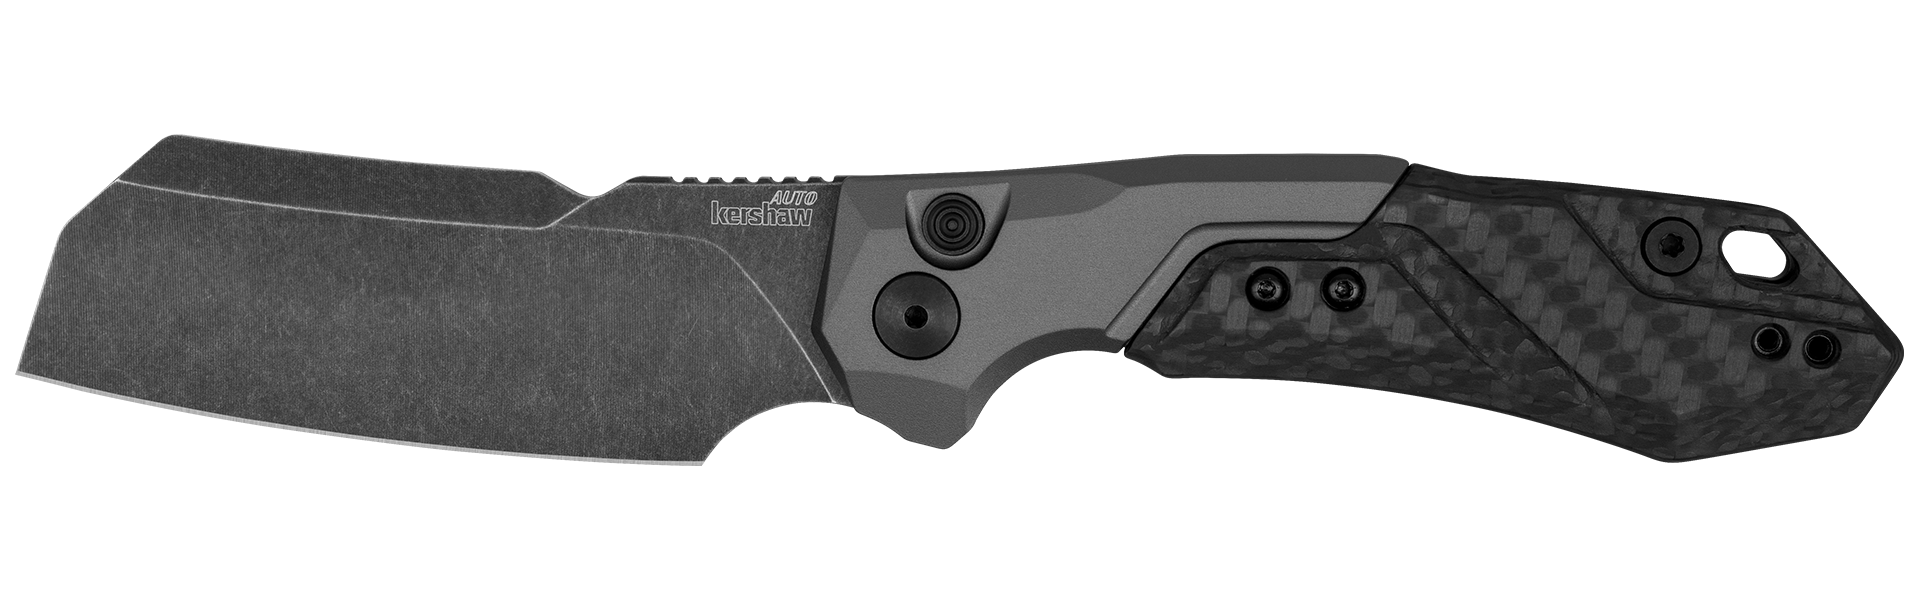 Kershaw Launch 14 - Automatic - CPM-154 - 7850